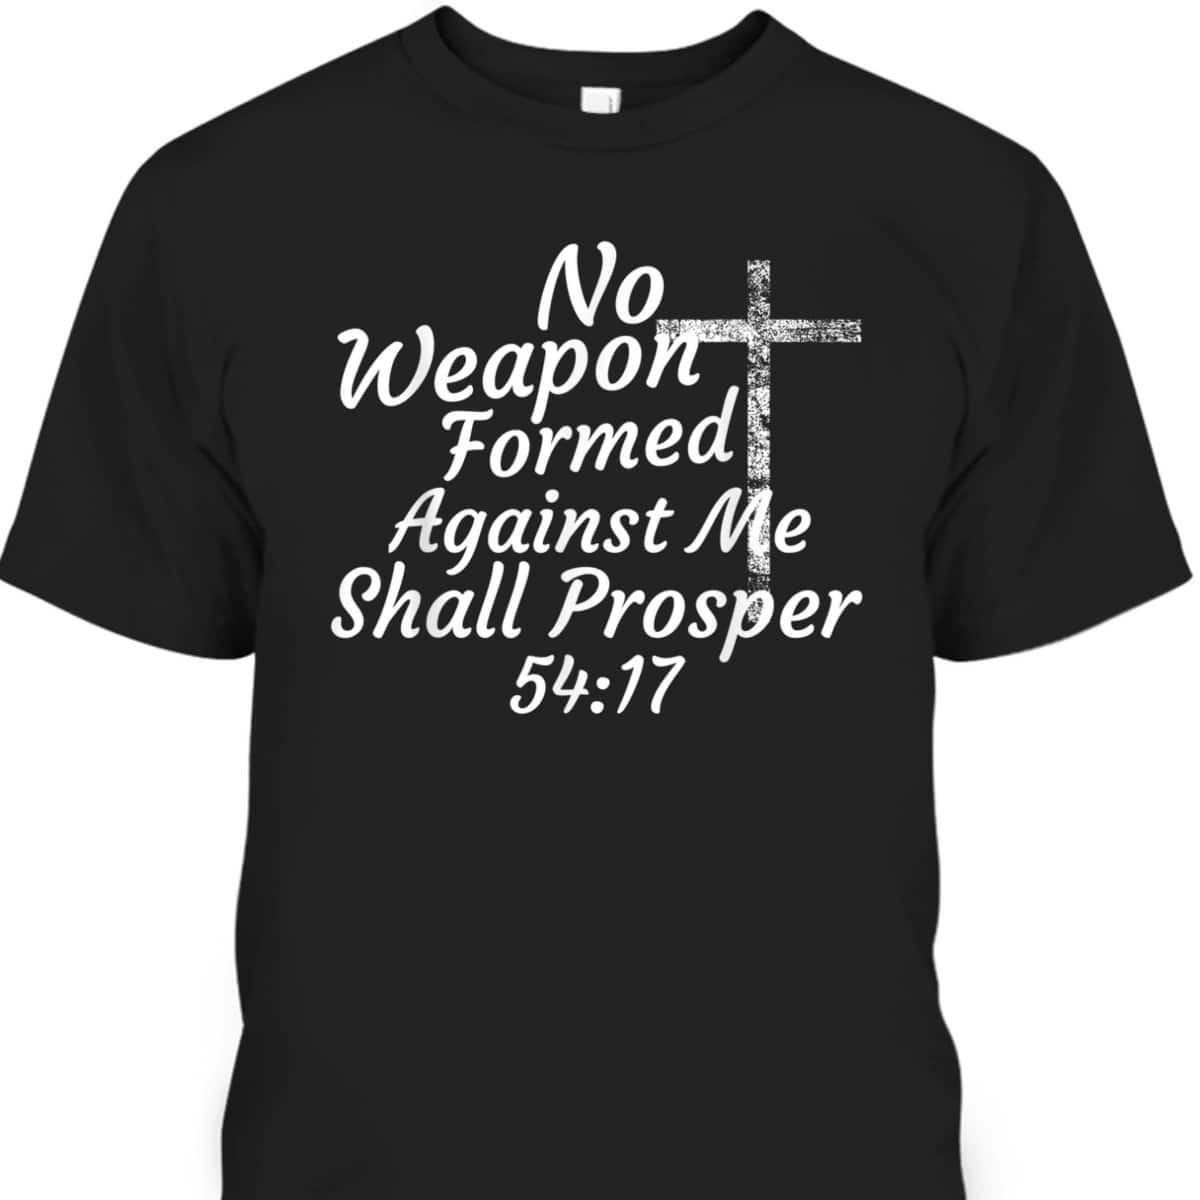 Christian Bible Verse 54:17 No Weapon Formed Against Me Shall Prosper T-Shirt